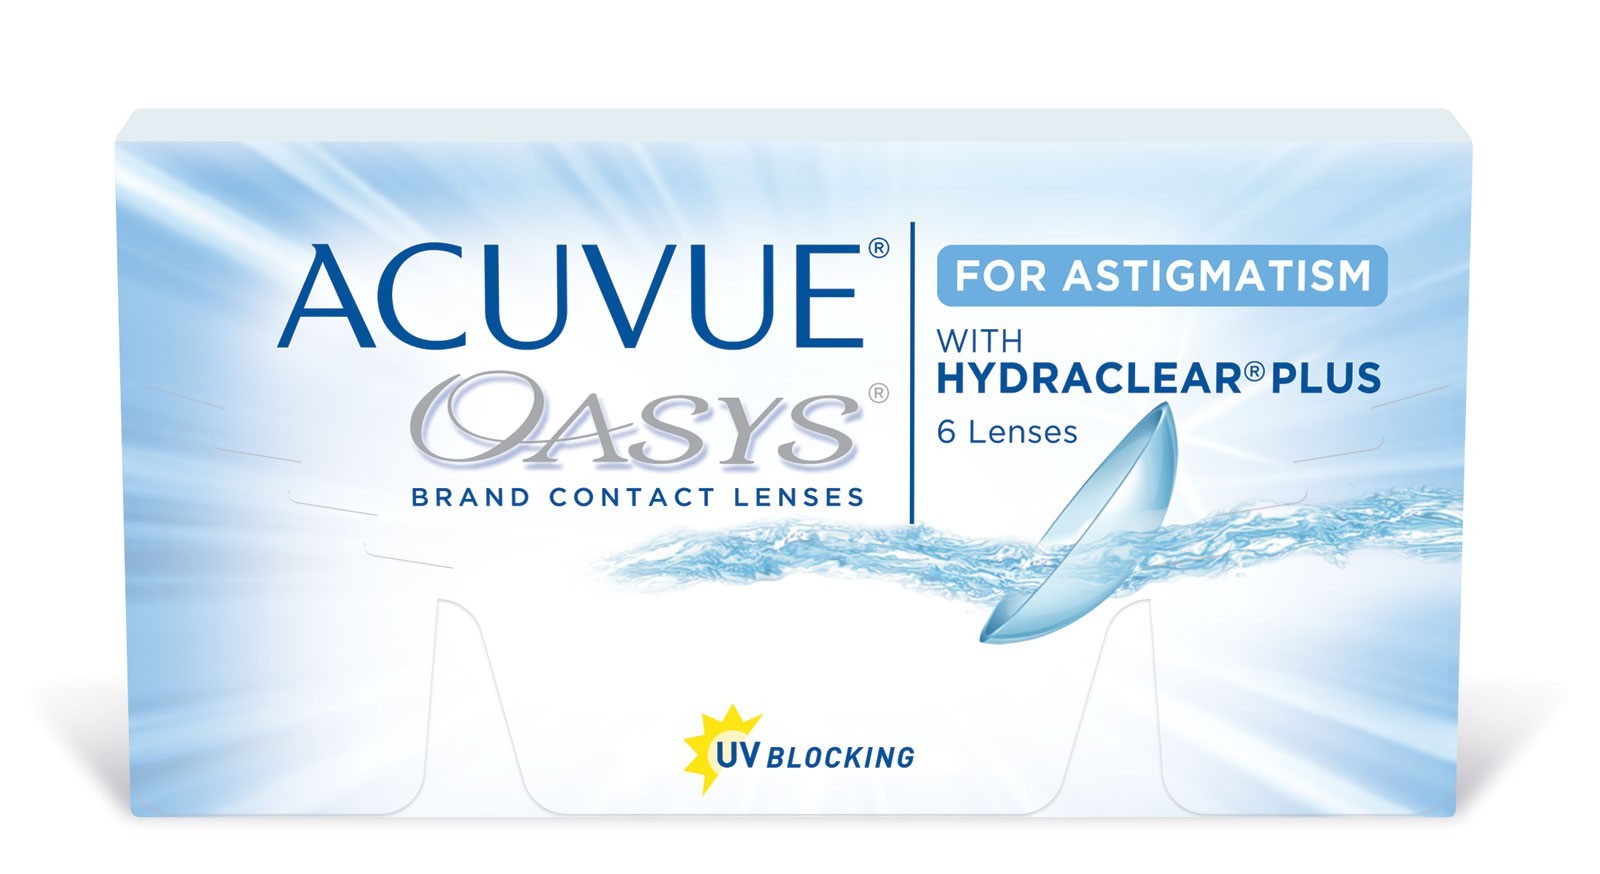 buy-acuvue-oasys-for-astigmatism-online-lens4vision-canada-based